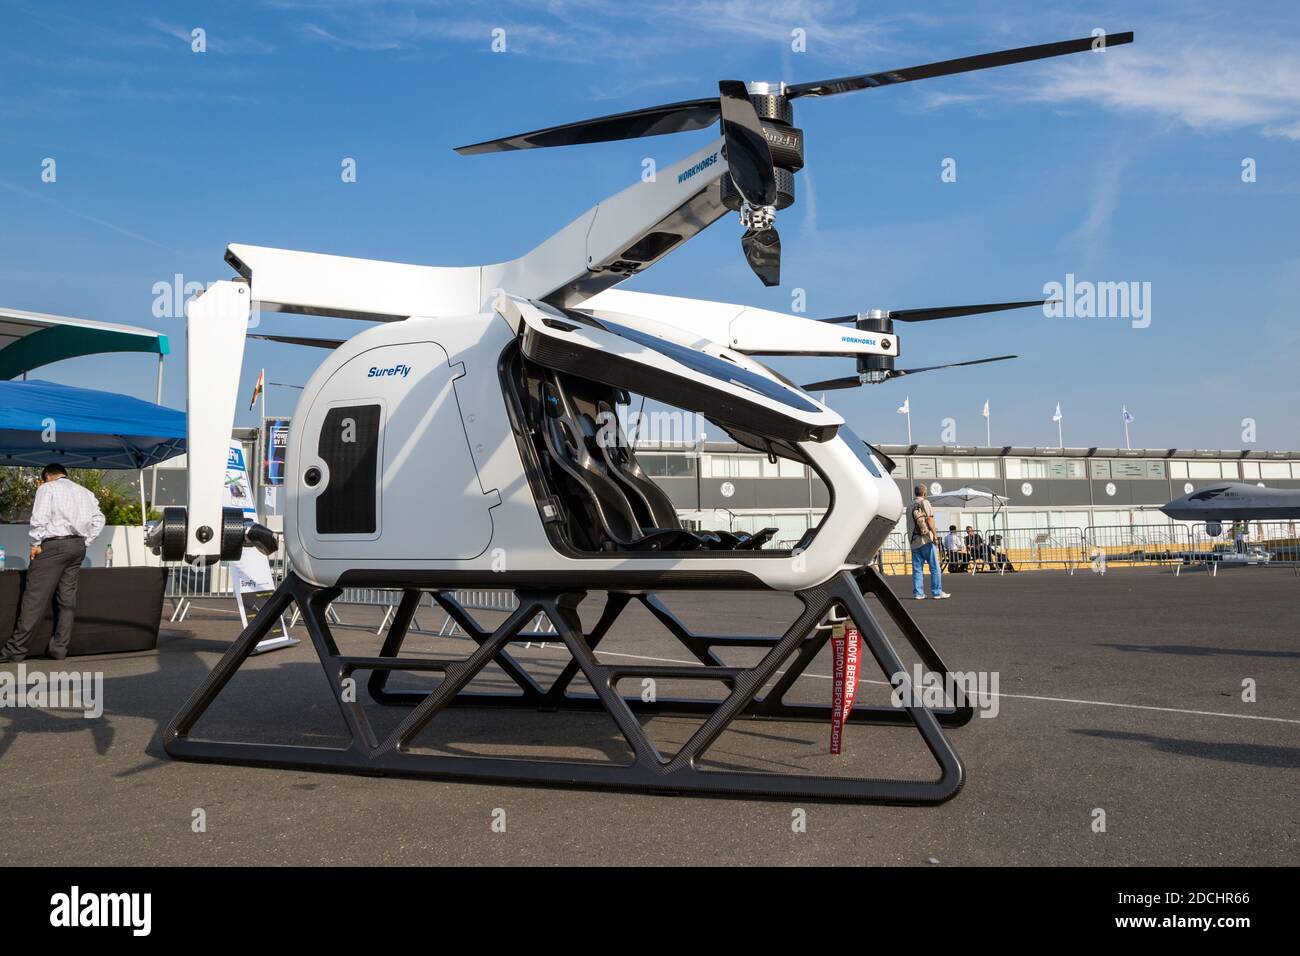 Workhorse SureFly two-seat hybrid eVTOL aircraft on display at the Paris Air Show. France - June 22, 2017 Stock Photo